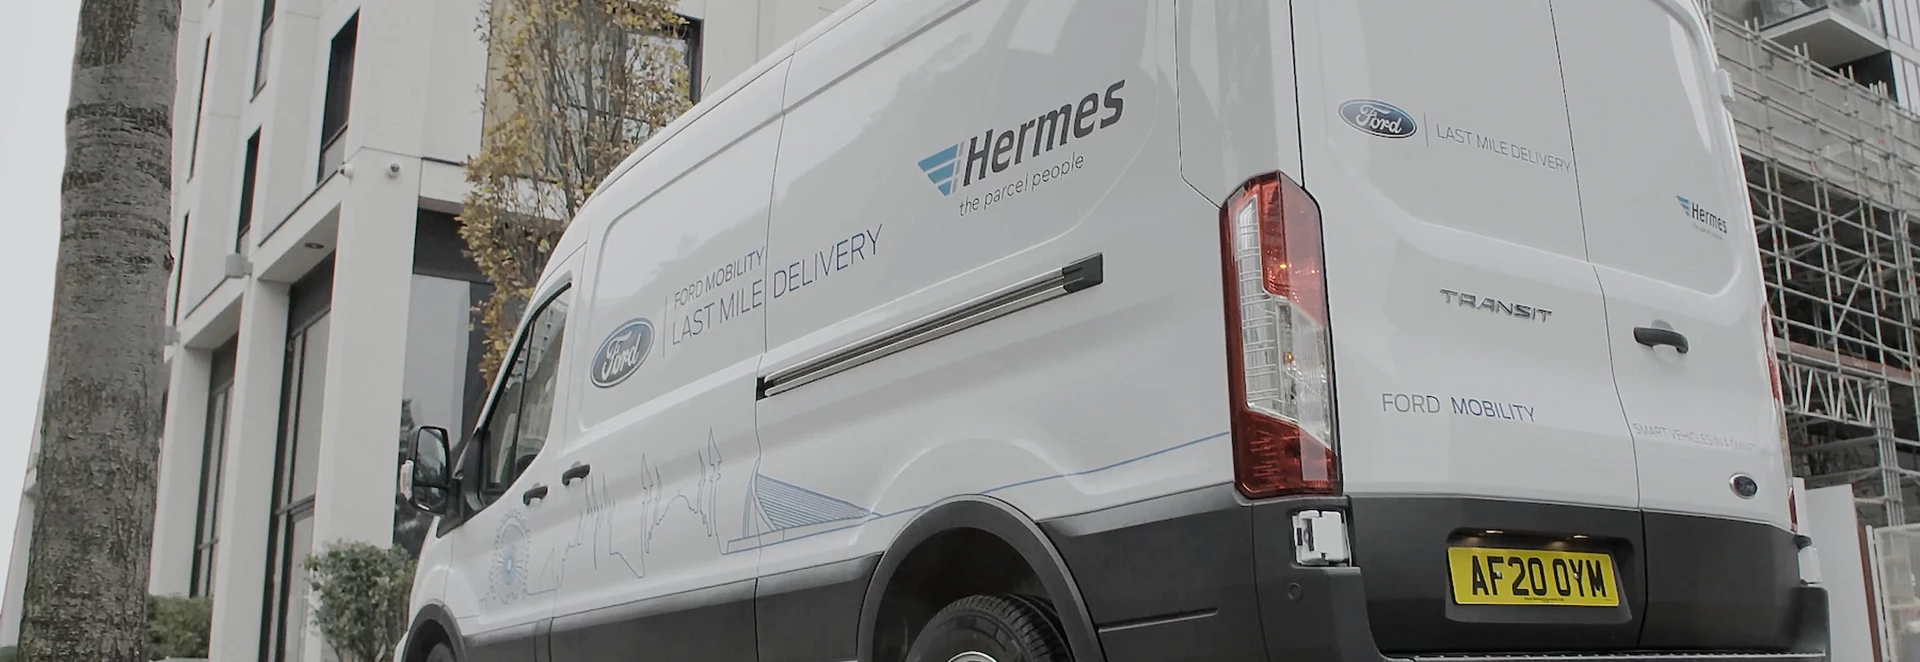 Ford teams up with Hermes to help make deliveries greener and quicker 